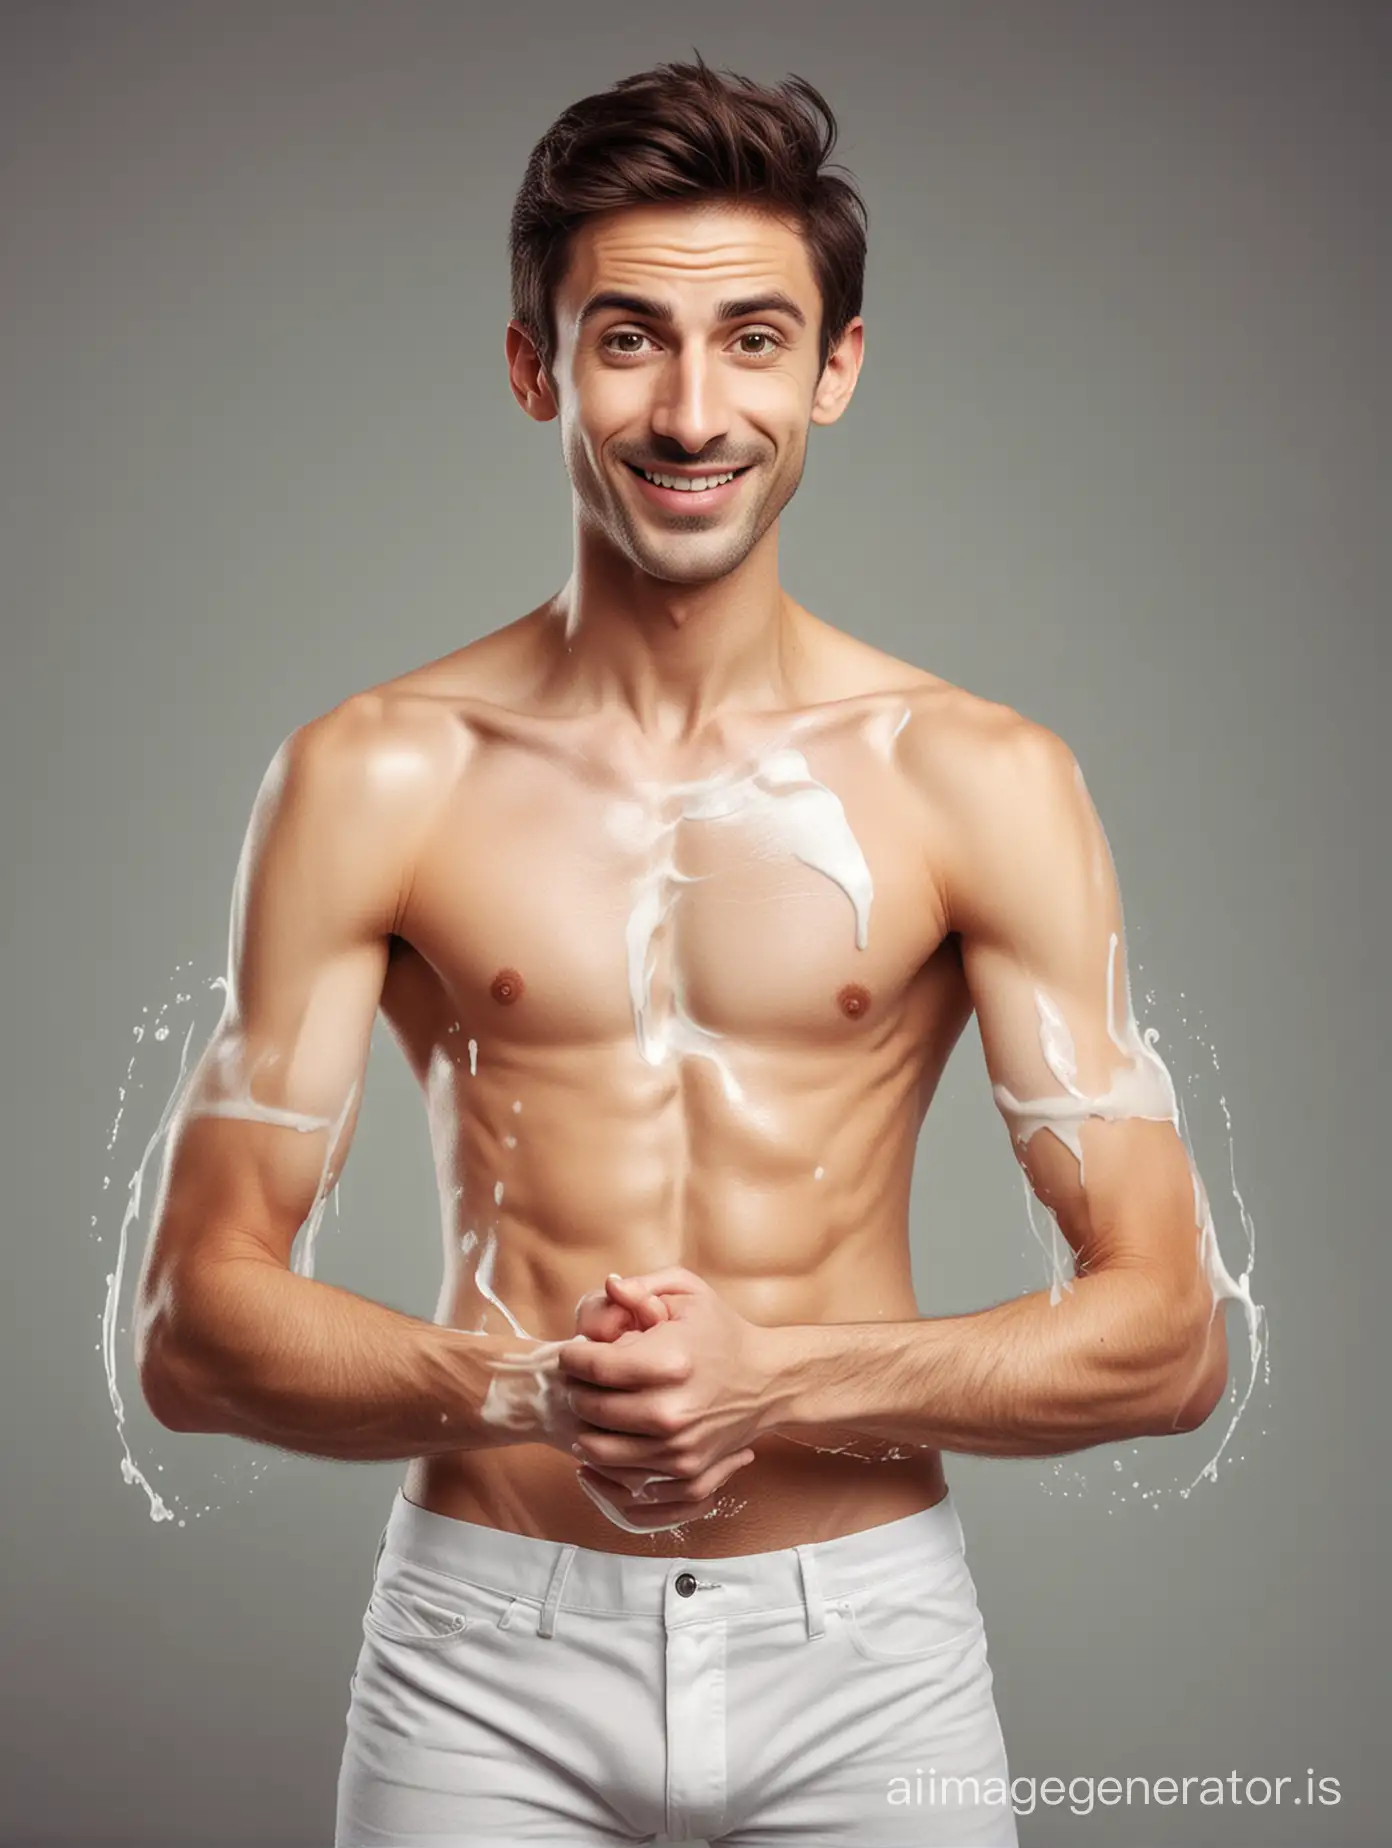 Humorous-Illustration-Slim-Man-Whipping-Lassi-with-His-Arms-Like-a-Homogenizer